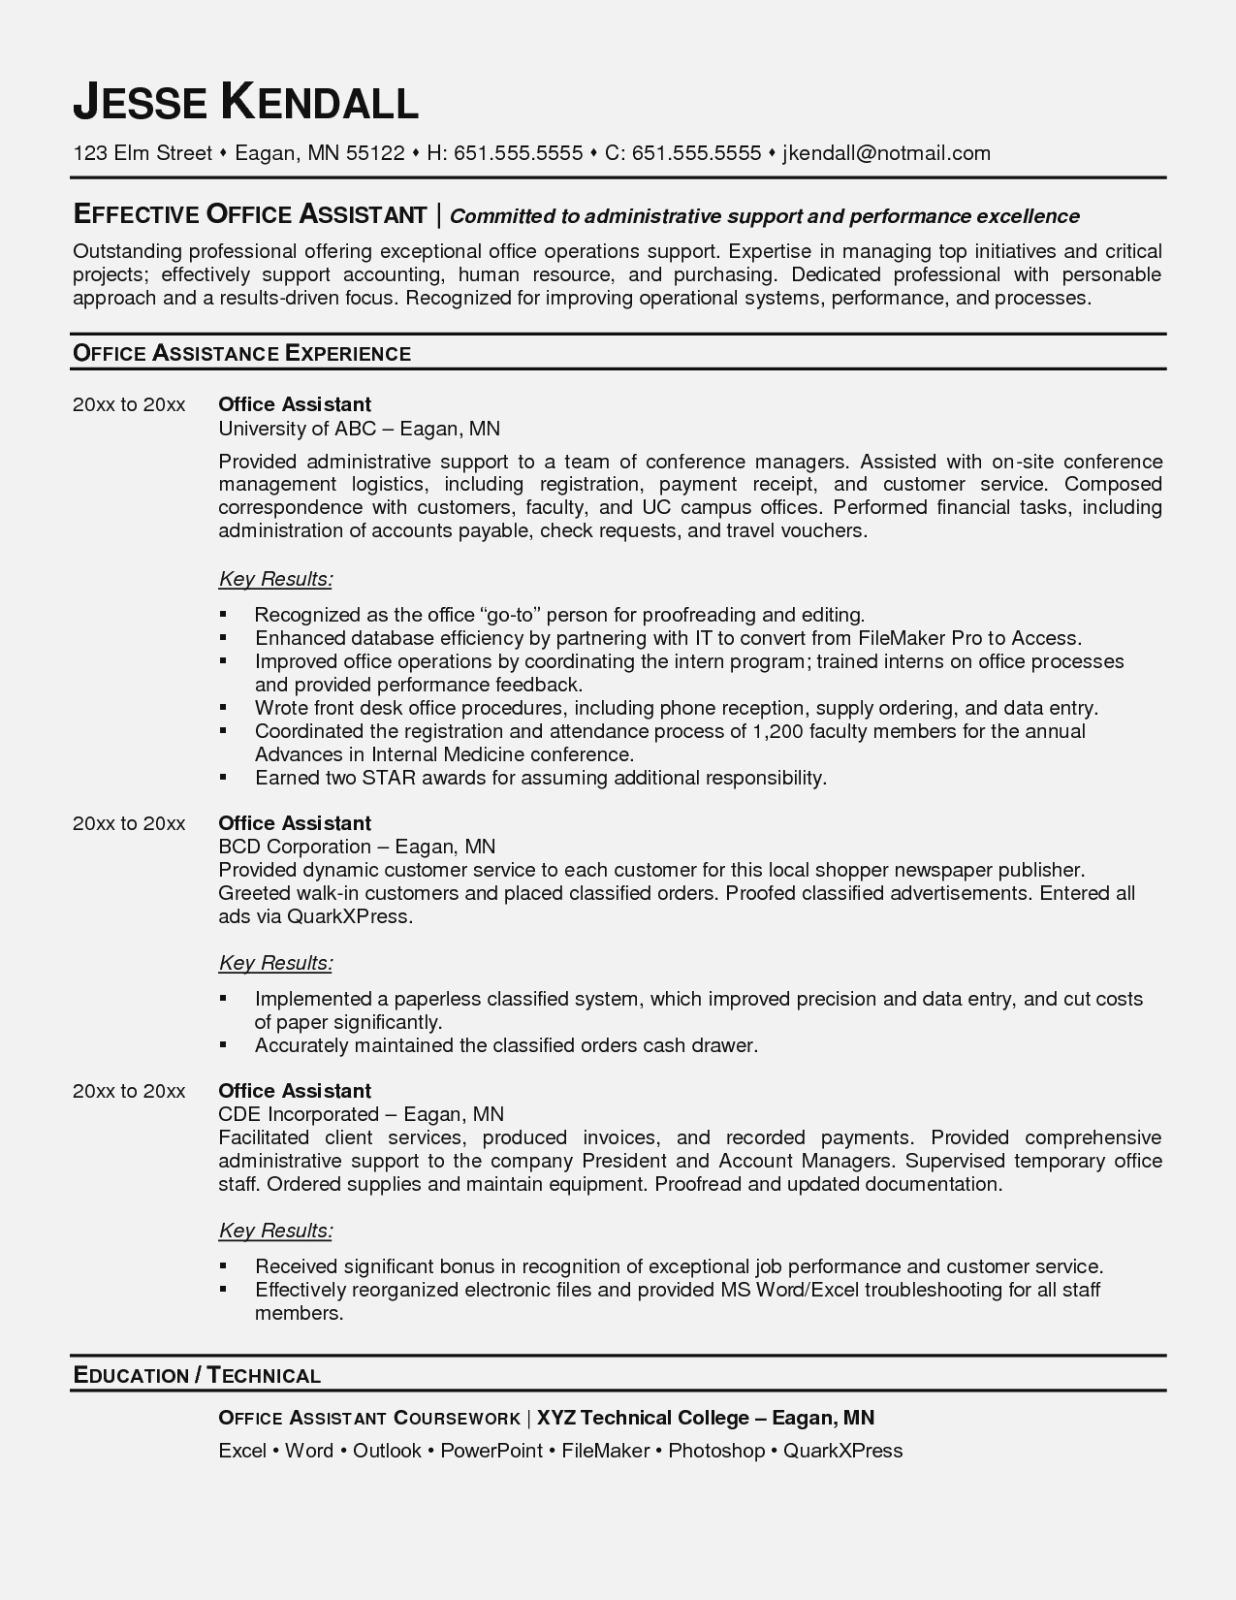 Office Assistant Resume Sample Office Assistant Resume Templates Save Good Fice Assistant Office Resume Templates office assistant resume|wikiresume.com